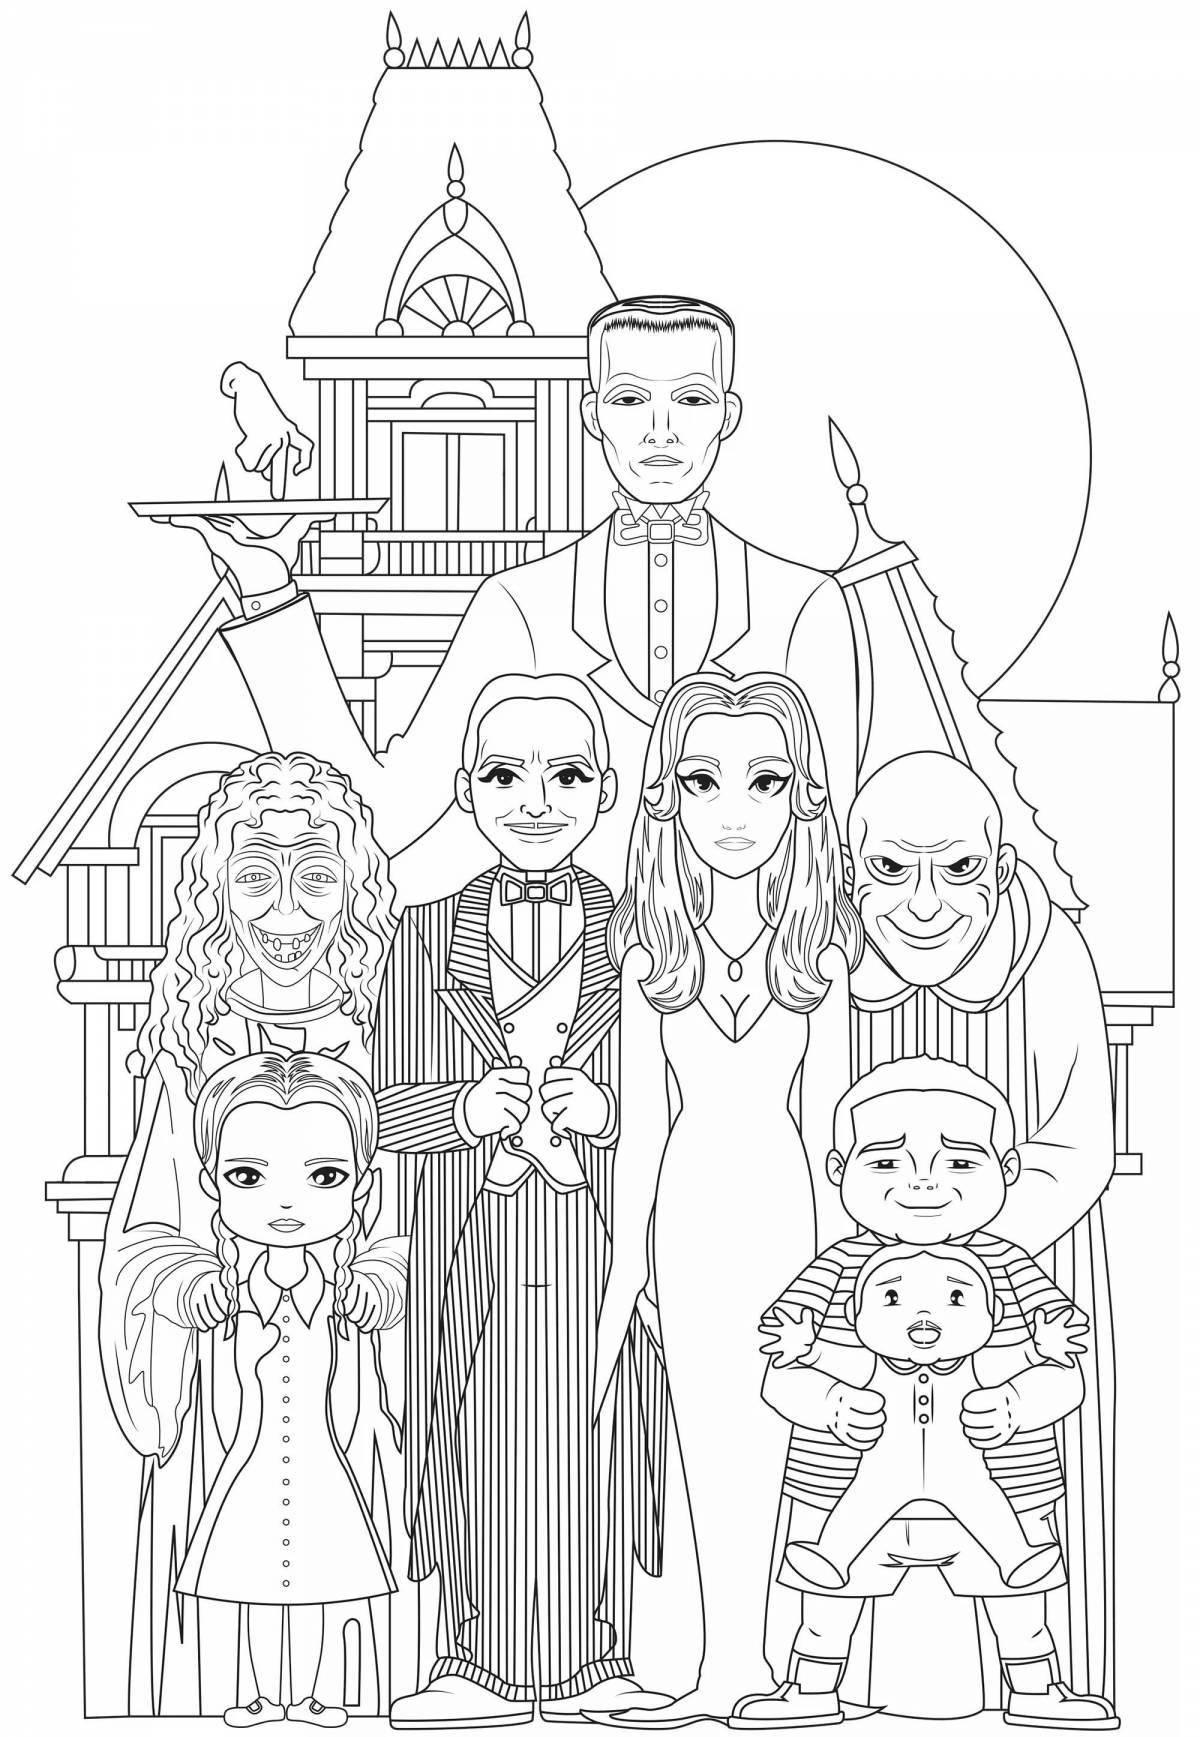 The Addams Family Wednesday